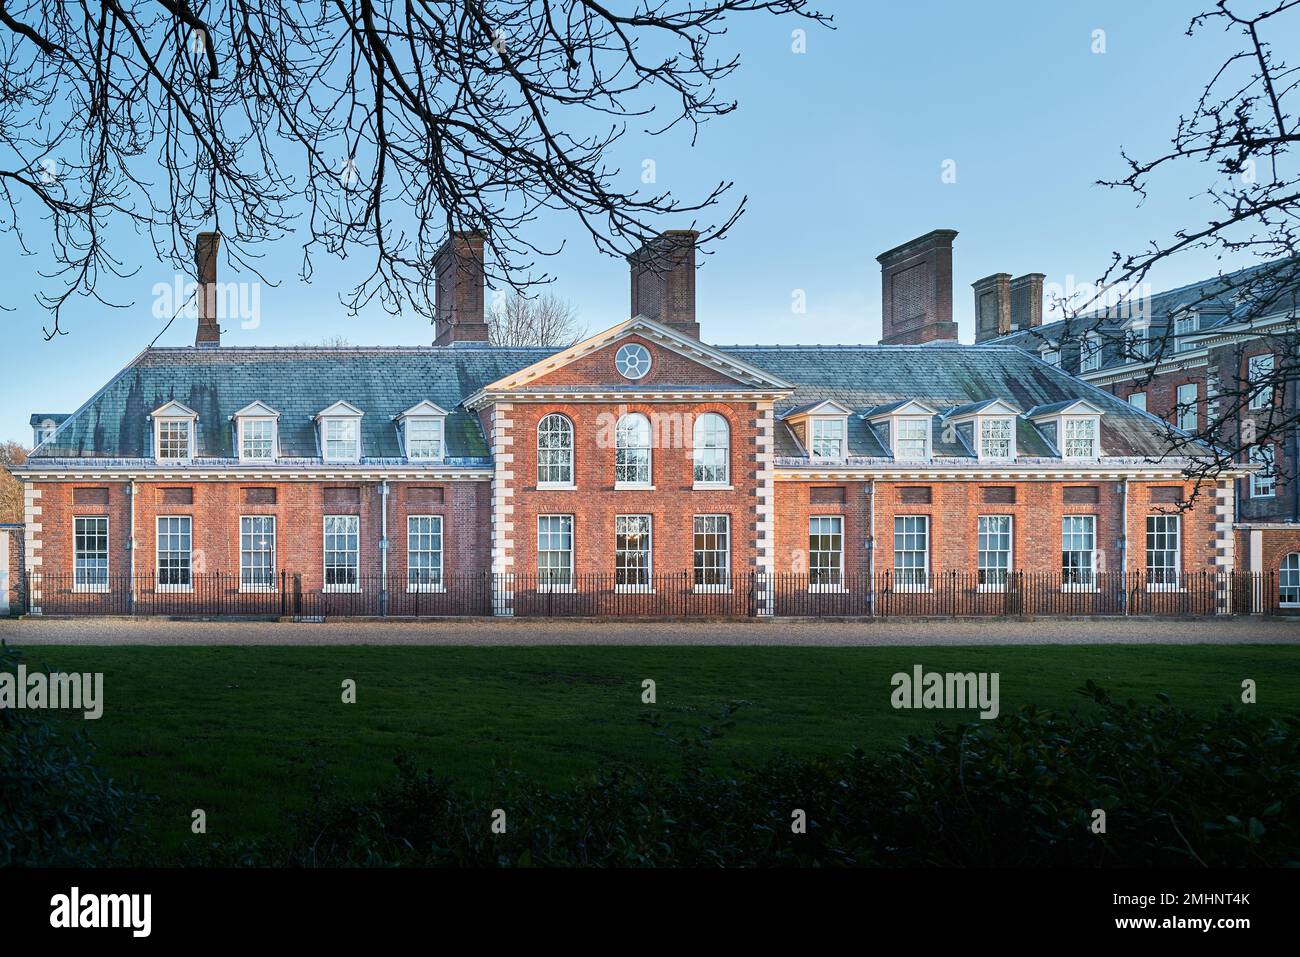 Royal Chelsea Hospital, London, England, founded in the seventeenth century by king Charles II for retired military pensioners. Stock Photo